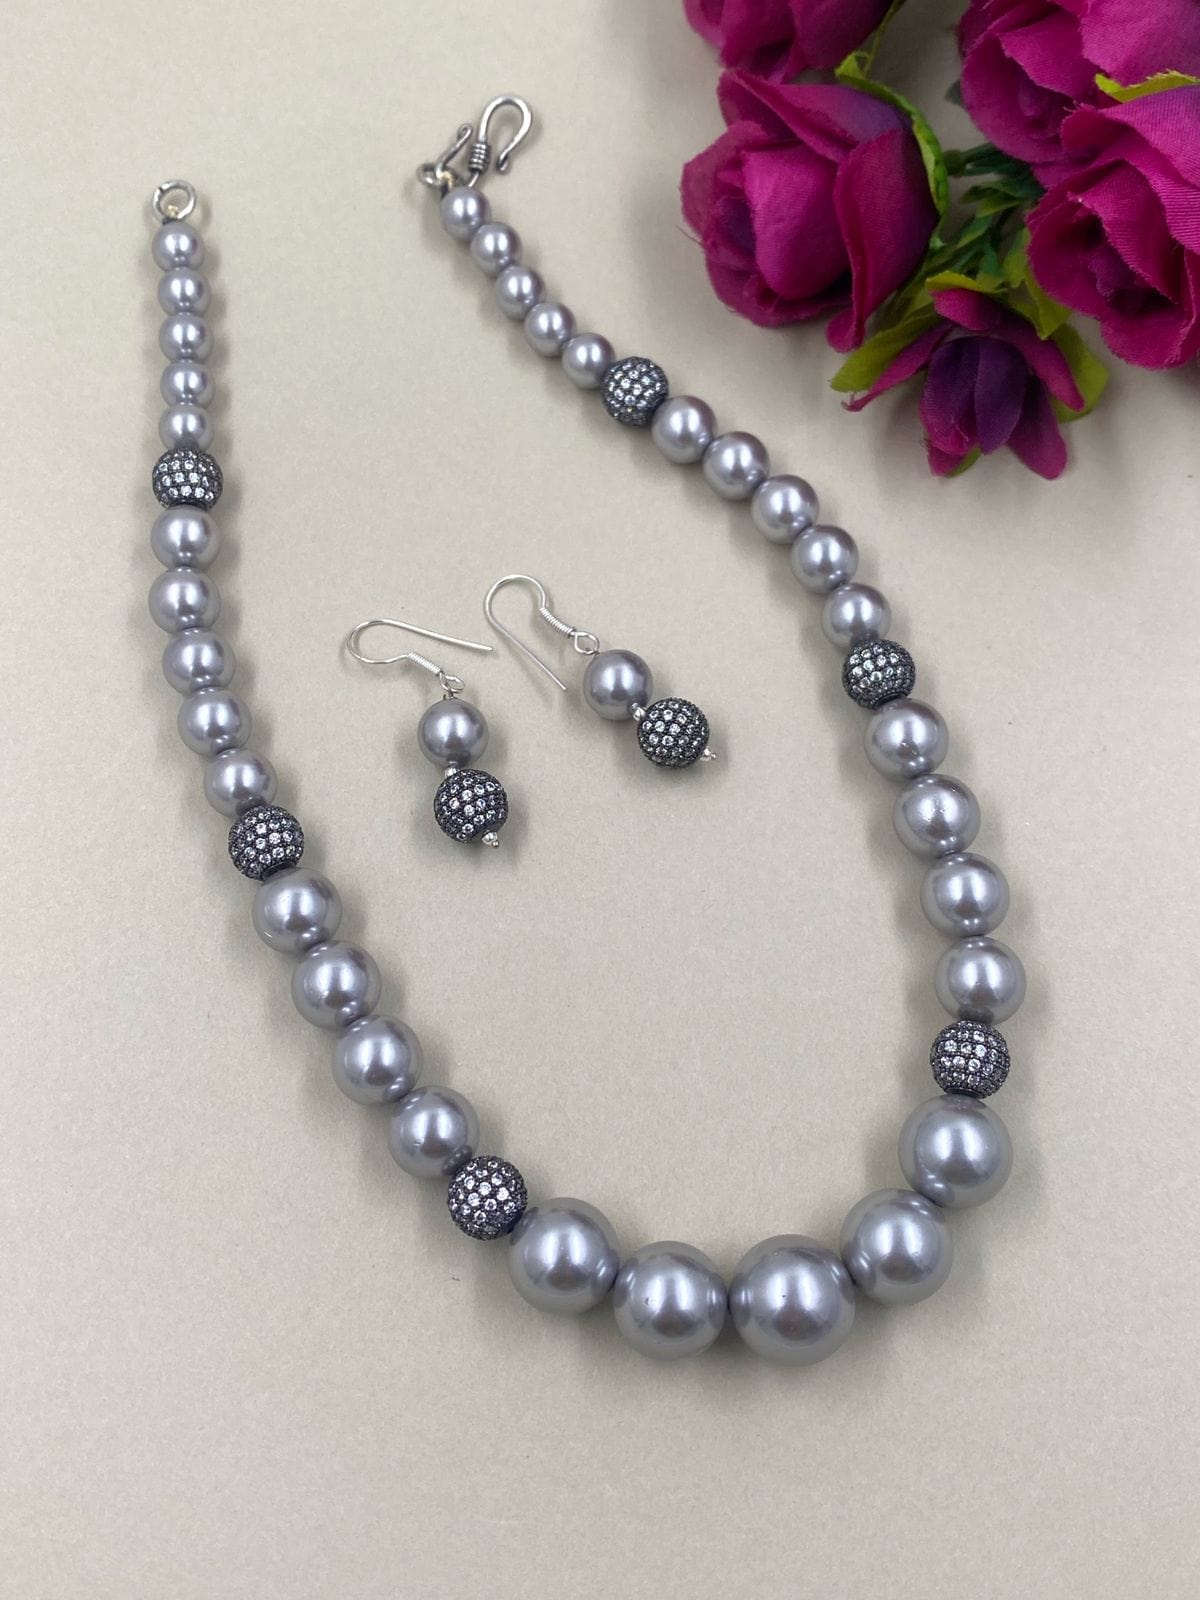 Handcrafted Grey Shell Pearl Fashion Beads Necklace For Women By Gehna Shop Beads Jewellery